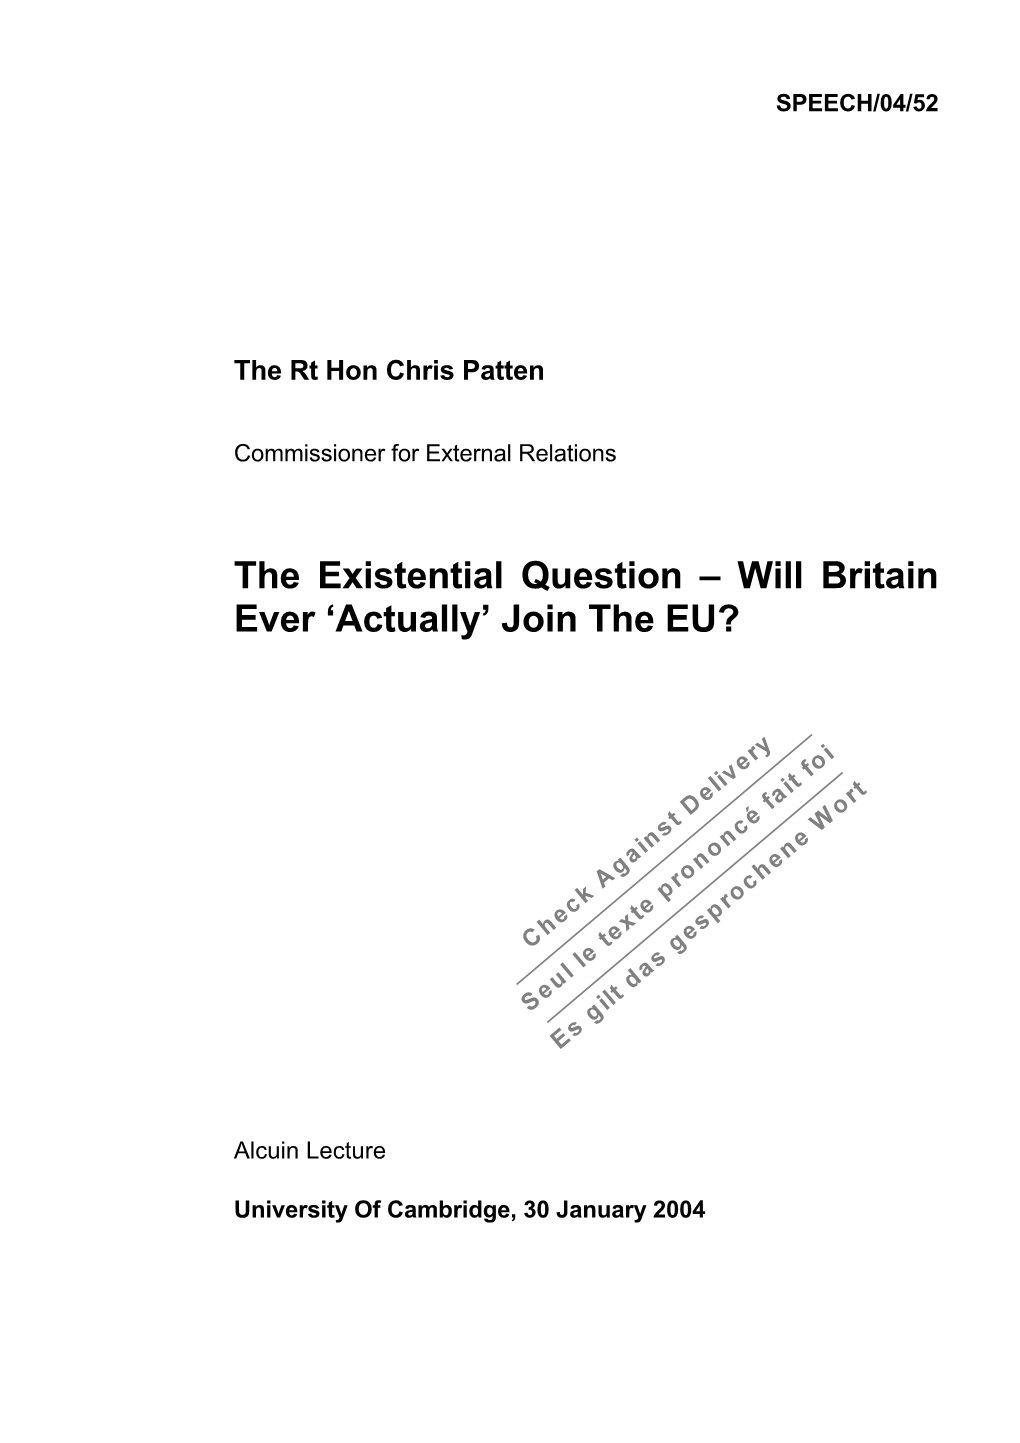 The Existential Question – Will Britain Ever ‘Actually’ Join the EU?